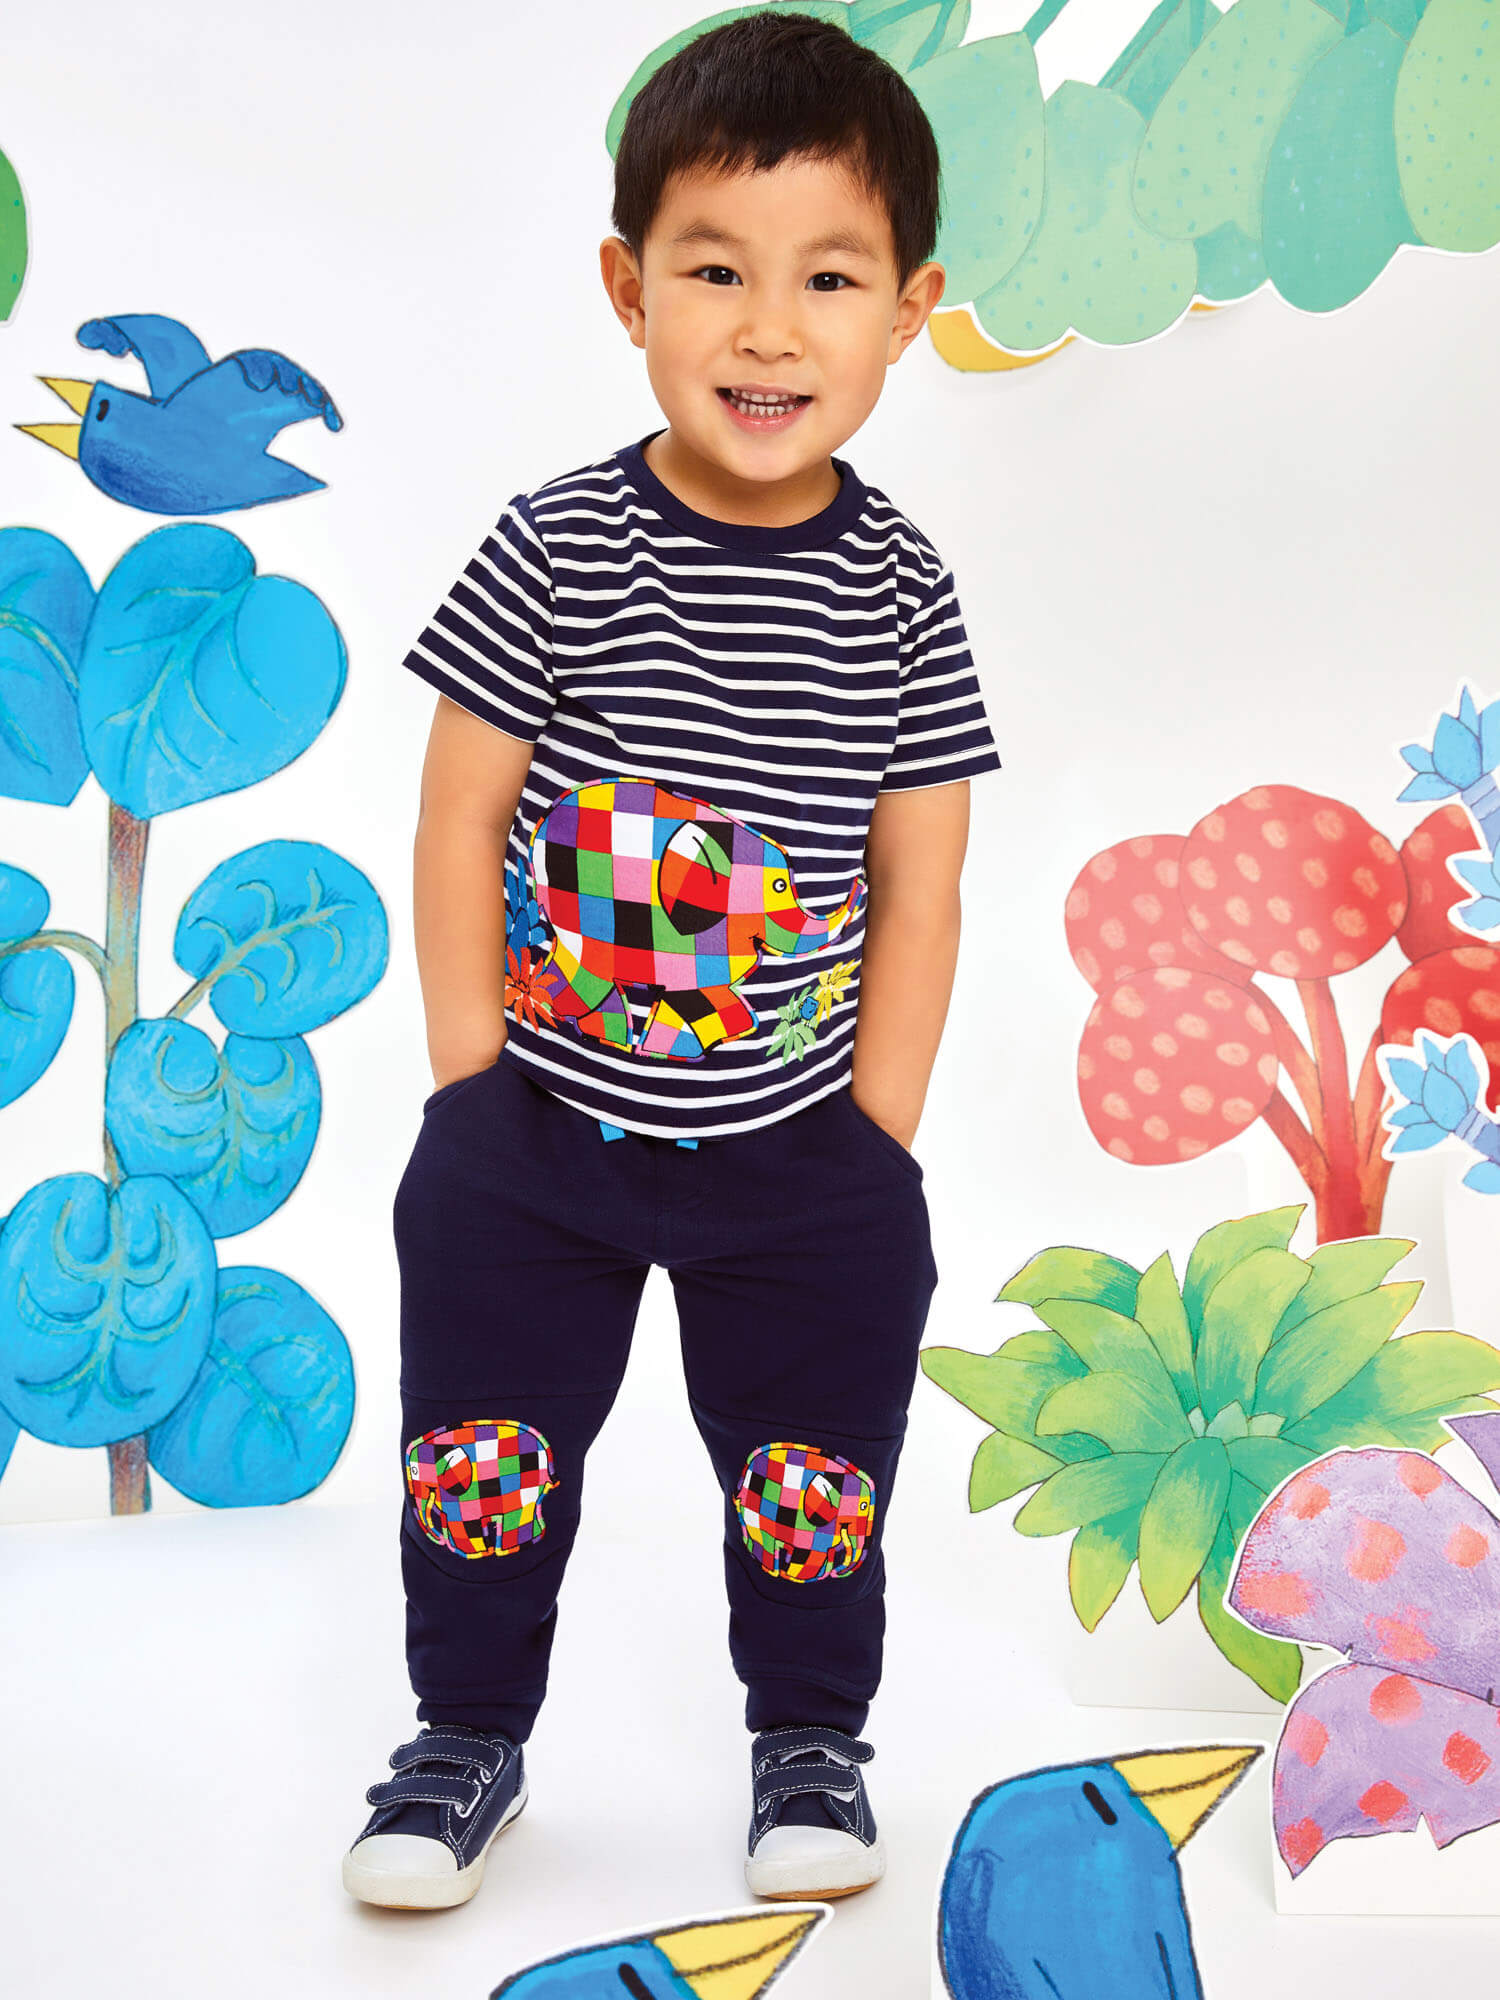 JoJo Maman Bebe Launches New Elmer Collection - Licensing